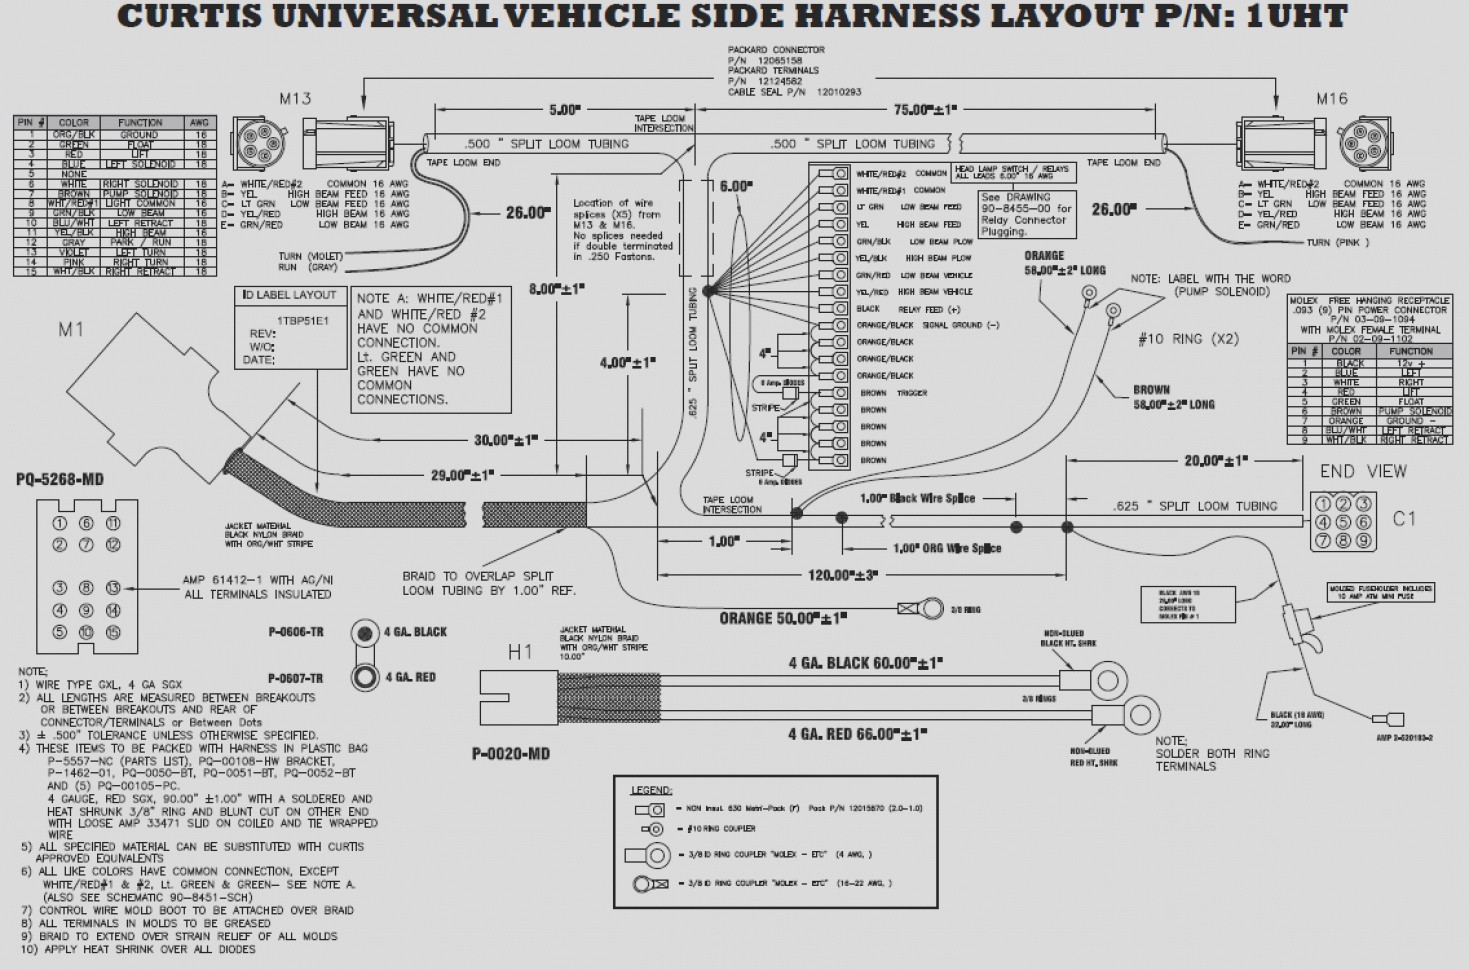 Part 91 Wiring Diagram is A Simplified Conventional Pictorial Car Snow Plow Headlight Wiring Harness